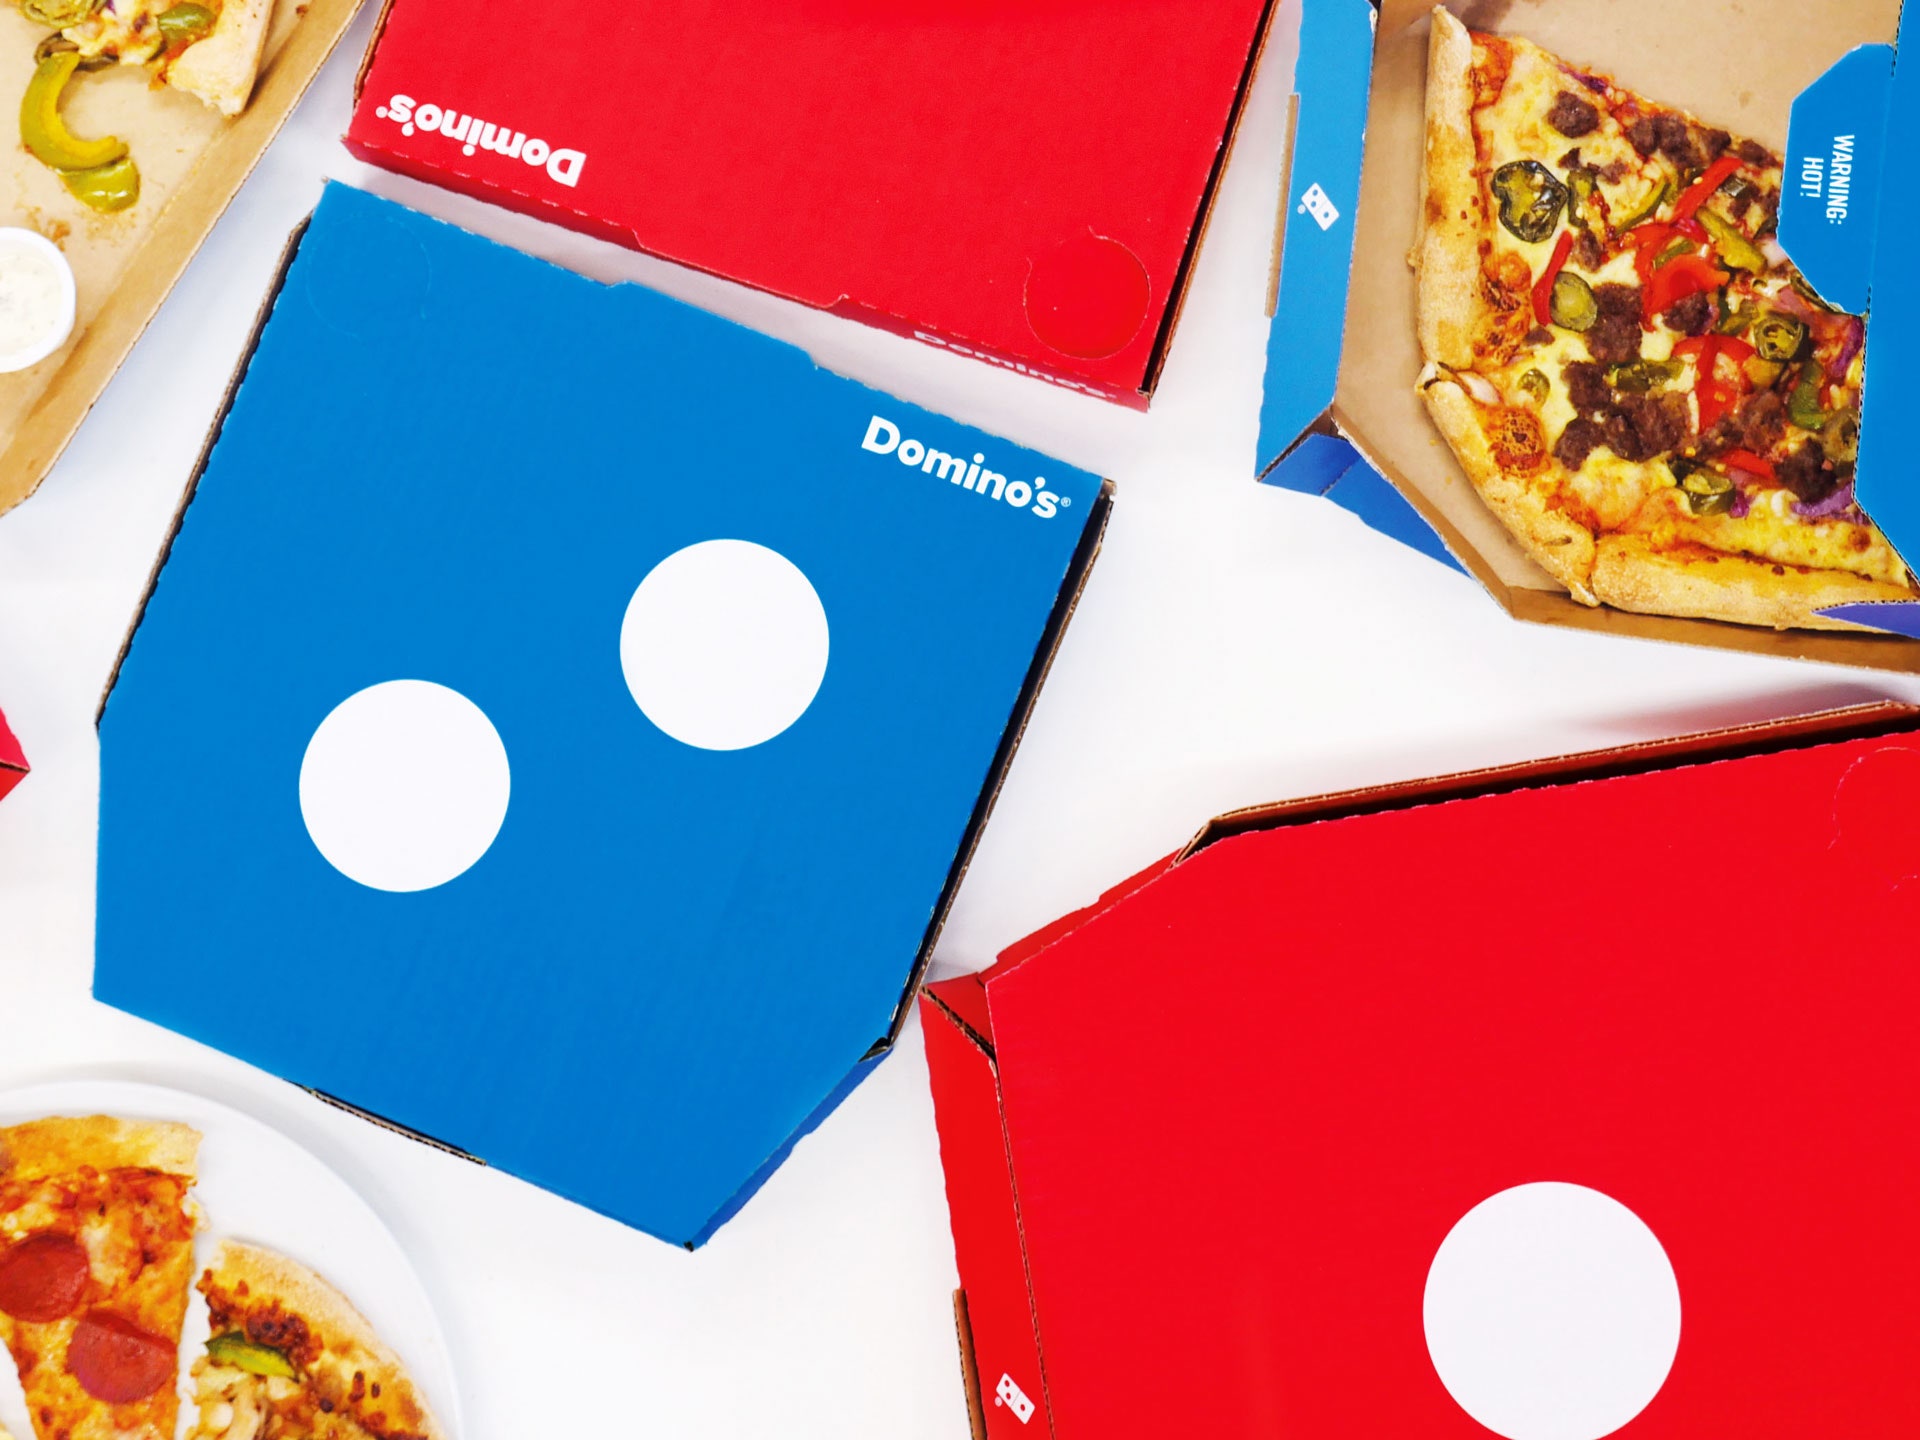 Dominos New Pizza Delivery Boxes Are Weirdly Clever WIRED